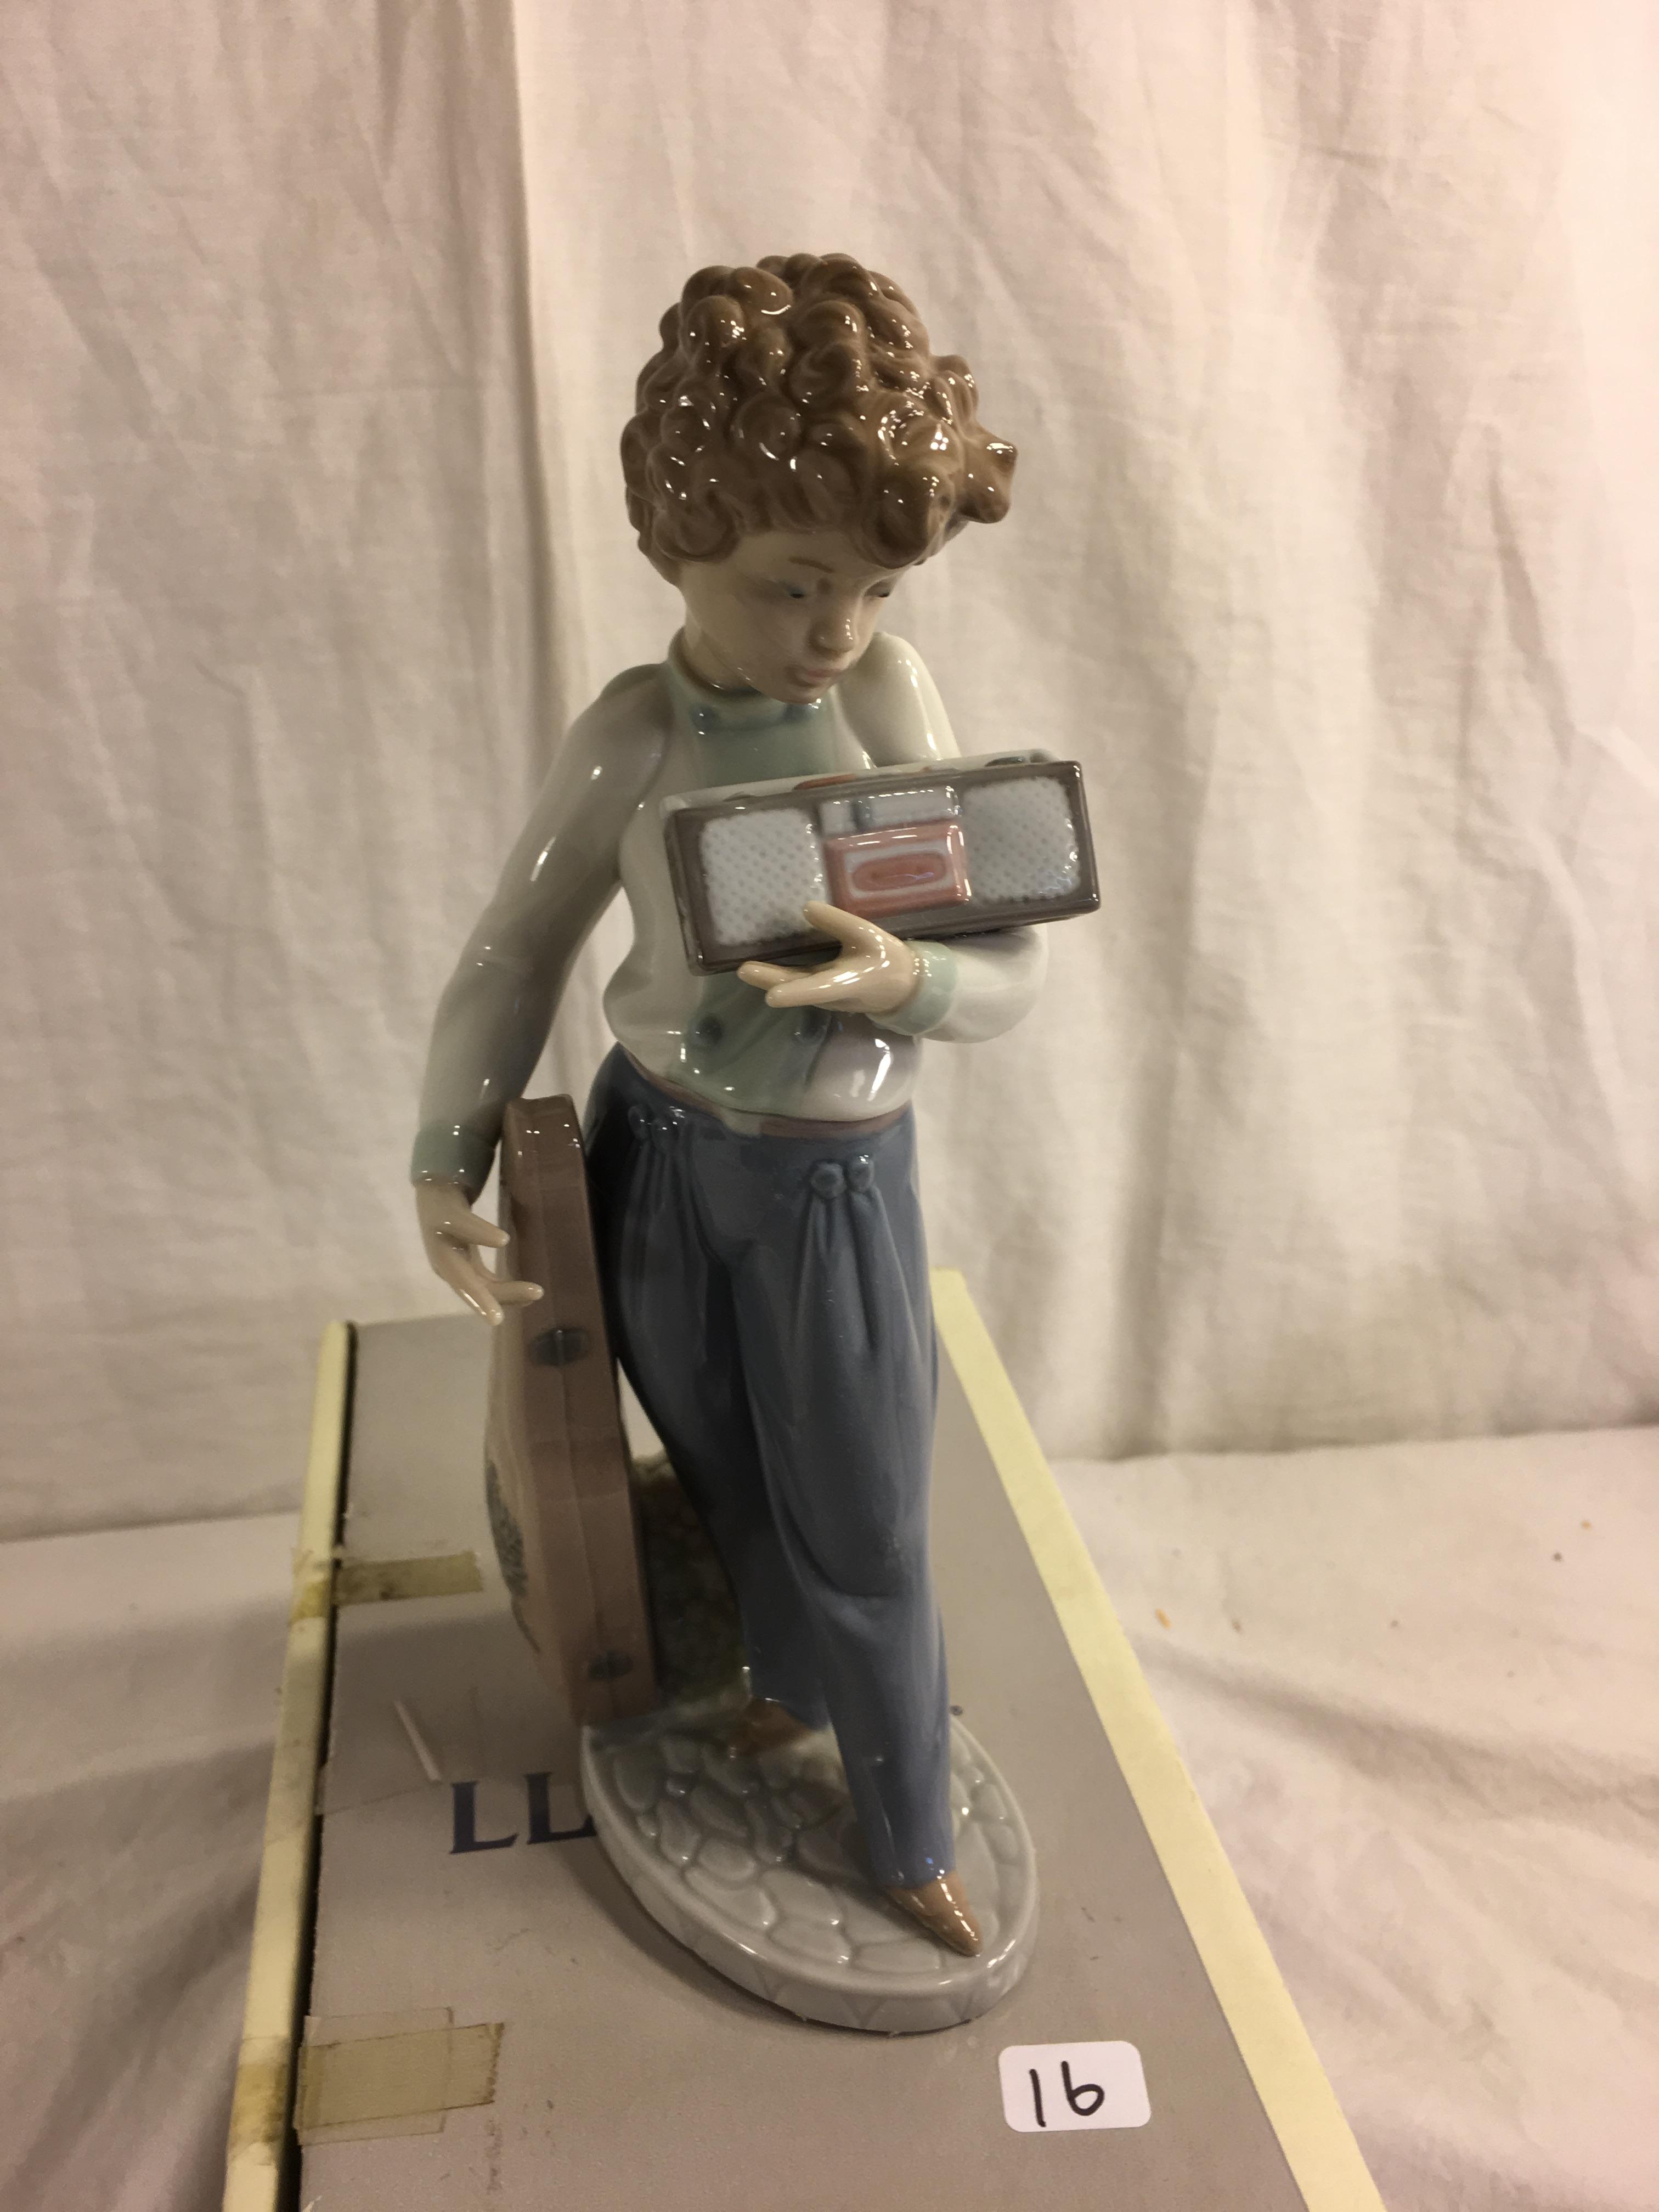 Collector Lladro Porcelain #5810 Musically Inclined Lladro Figurine W/Original Box Size:11"tall